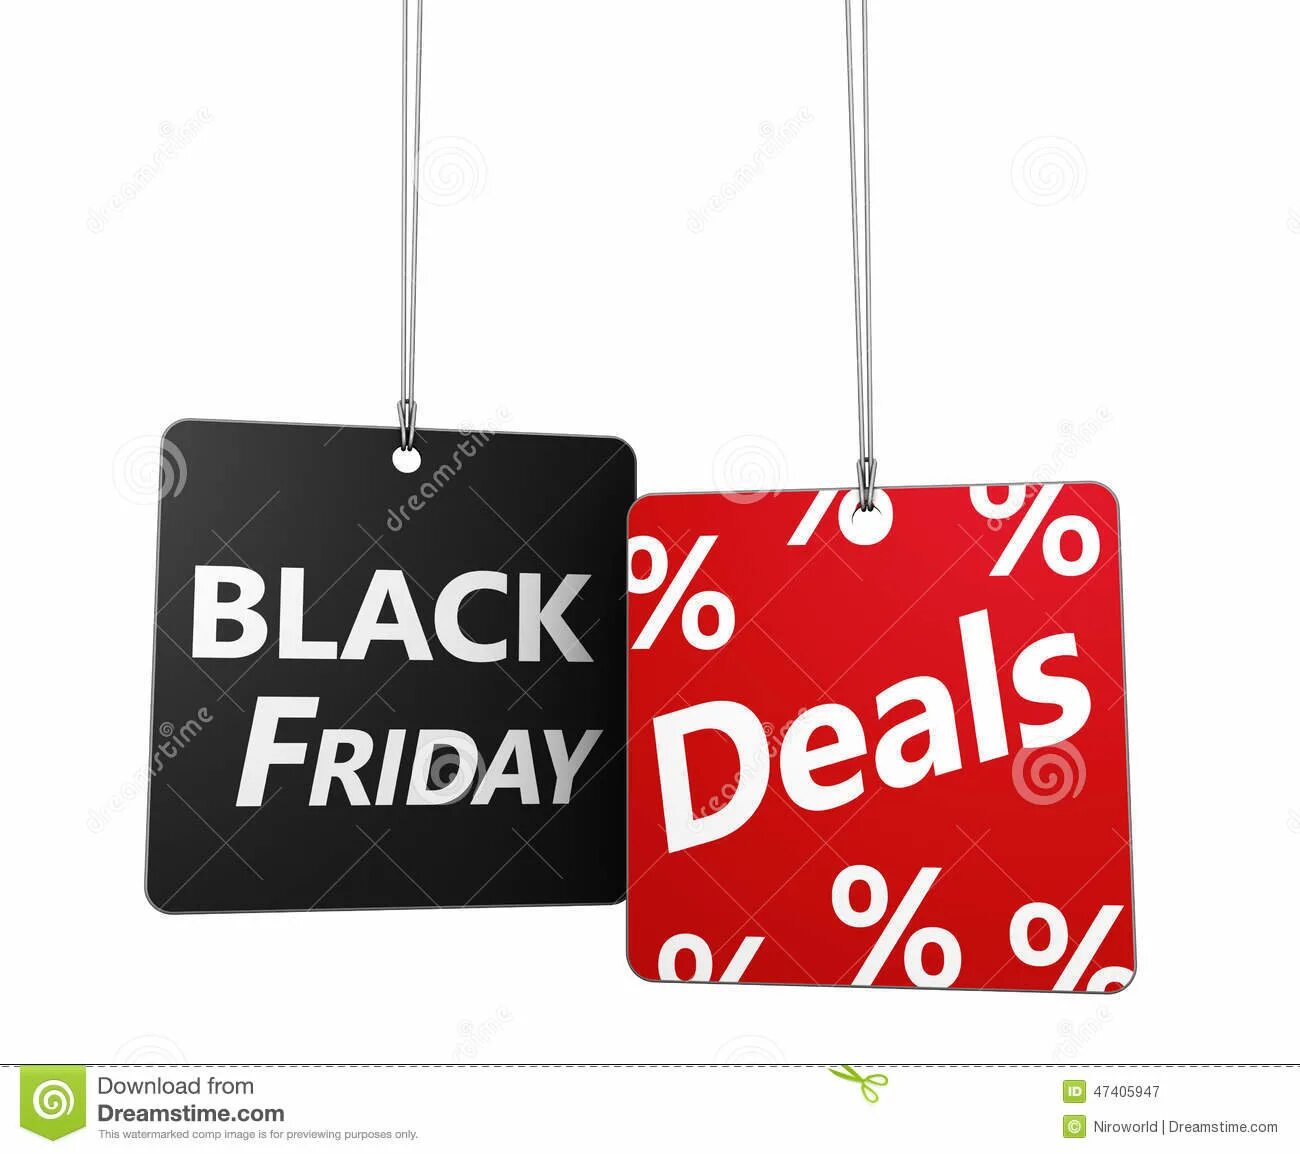 Price tag Black Friday. Пятница ярлык. Пт пятница ярлык. Общение бирками. Price deals